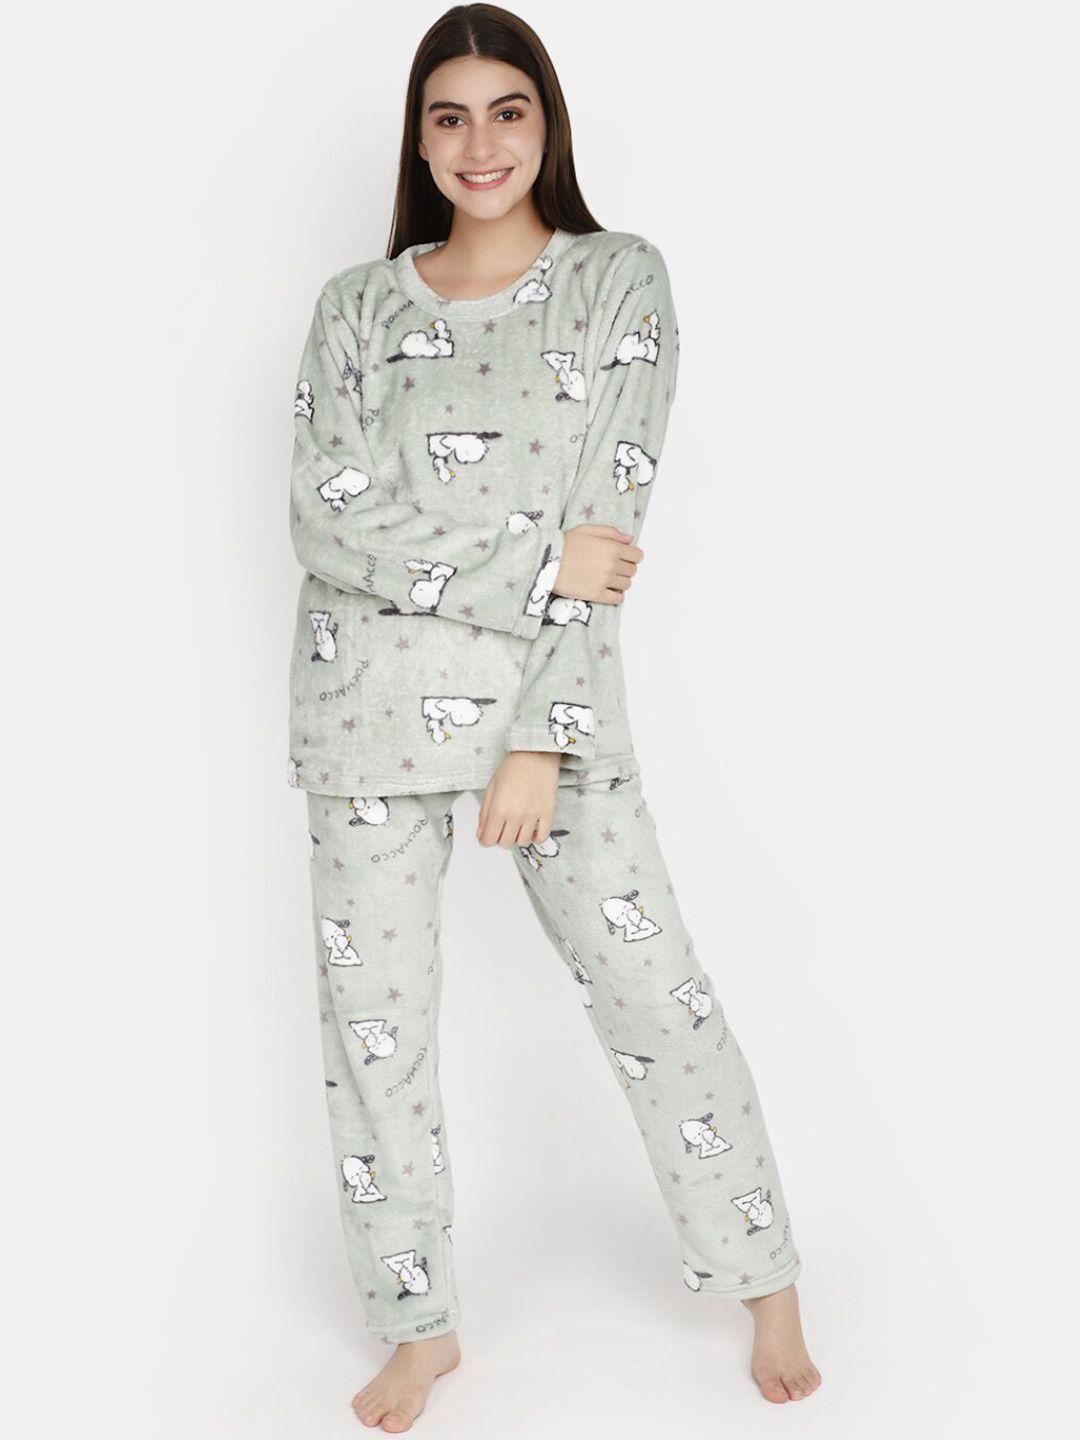 v-mart-graphic-printed-pure-cotton-night-suit